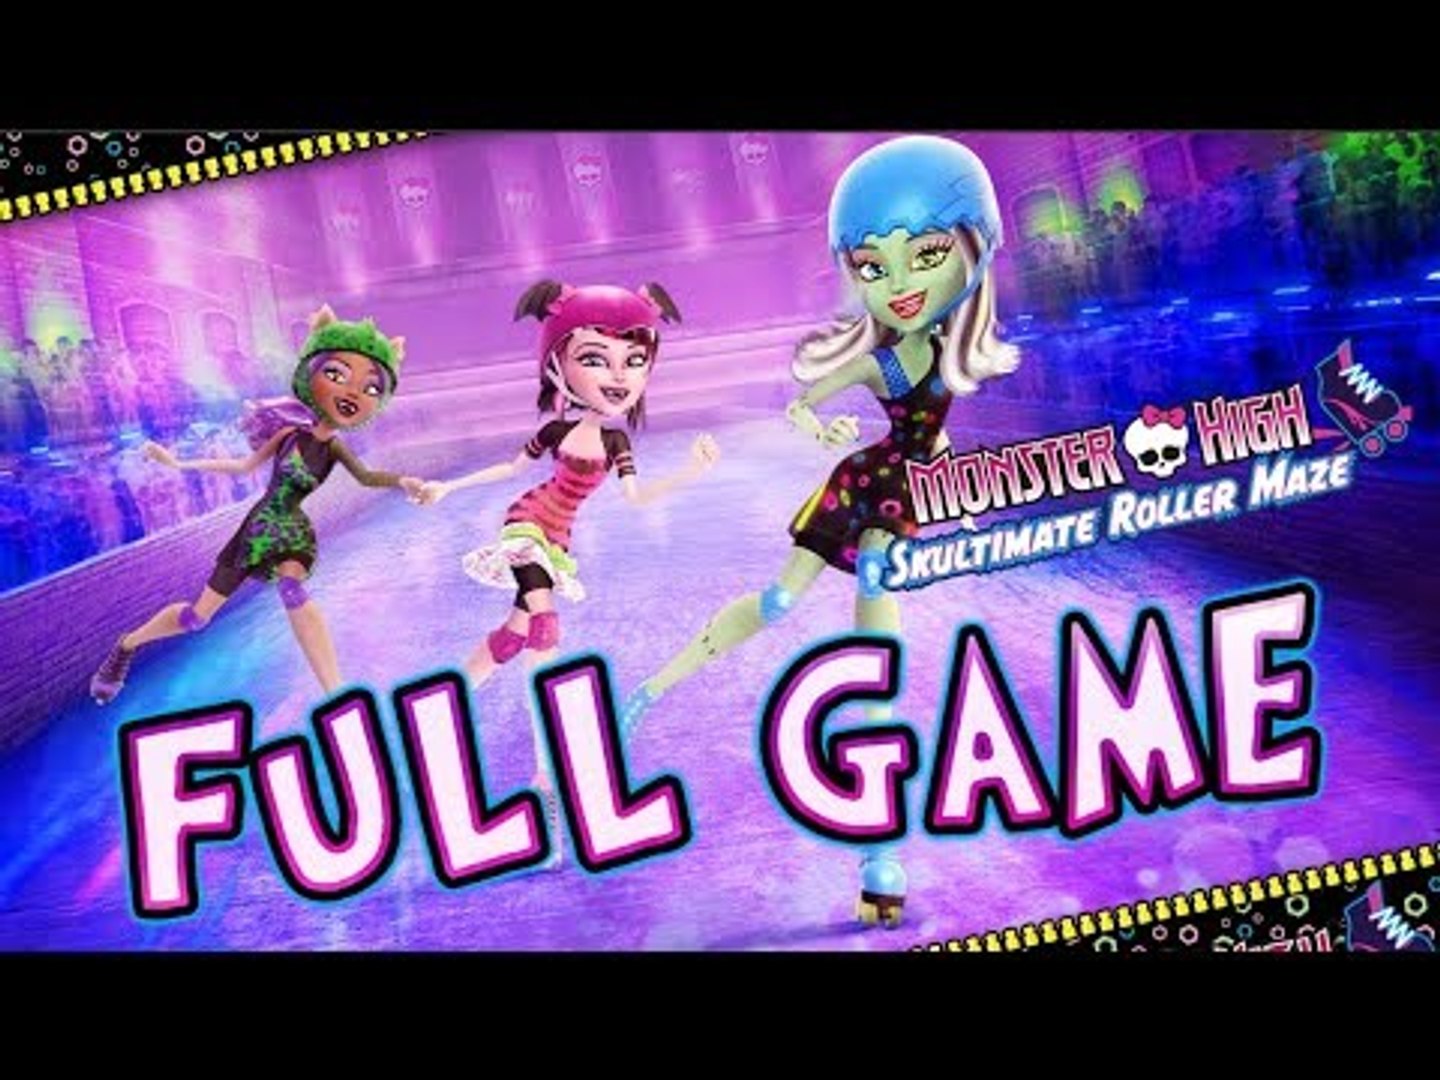 Monster High: Skultimate Roller Maze FULL GAME Longplay (Wii, 3DS, DS) -  video Dailymotion